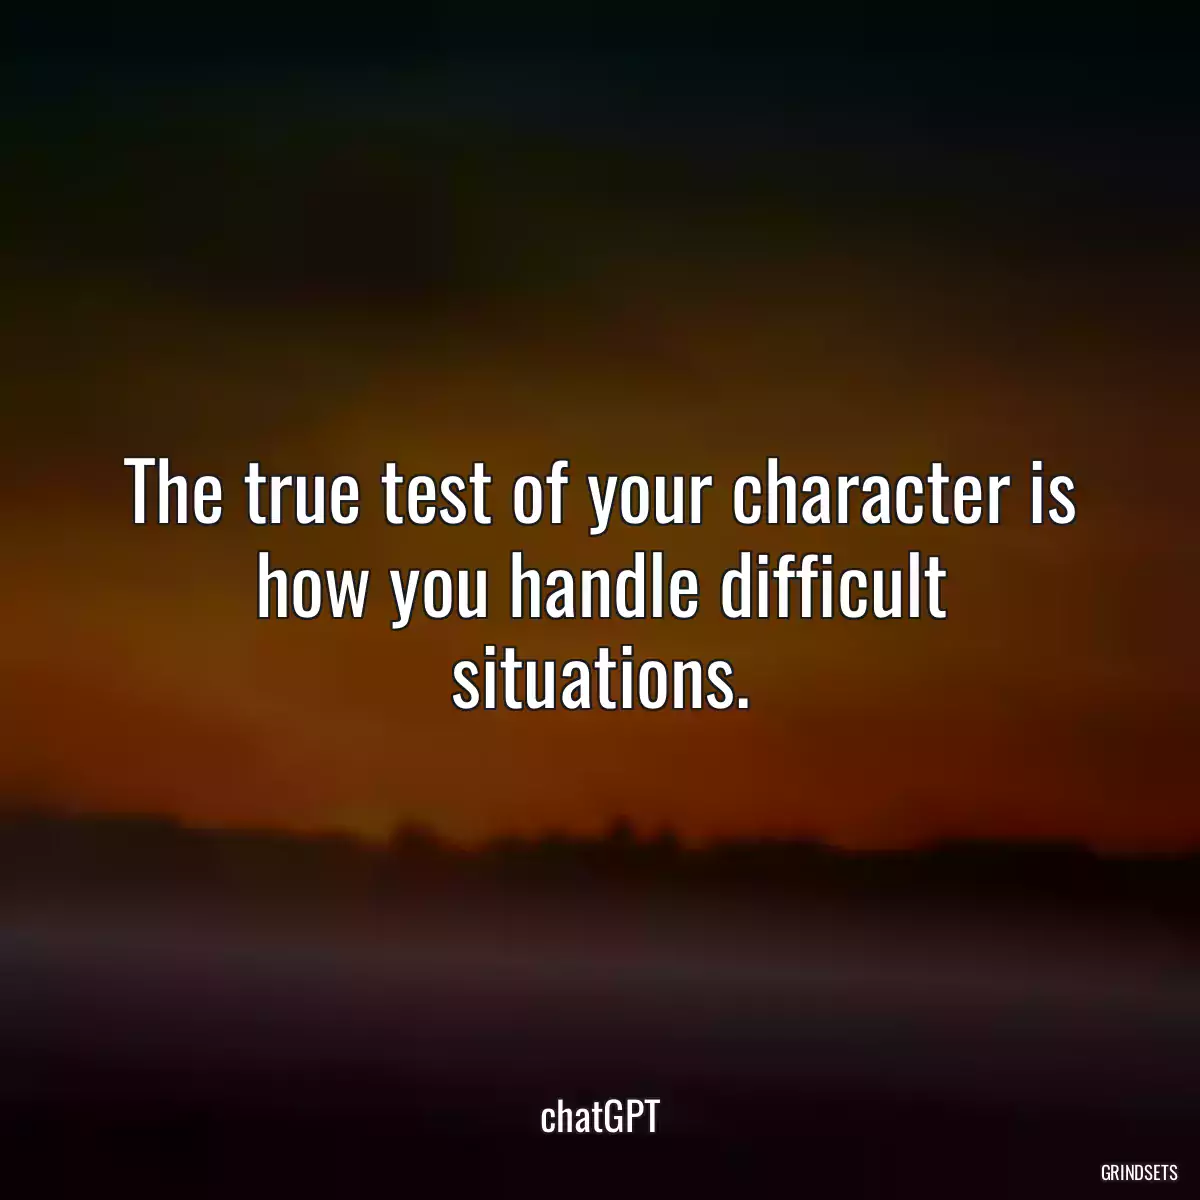 The true test of your character is how you handle difficult situations.